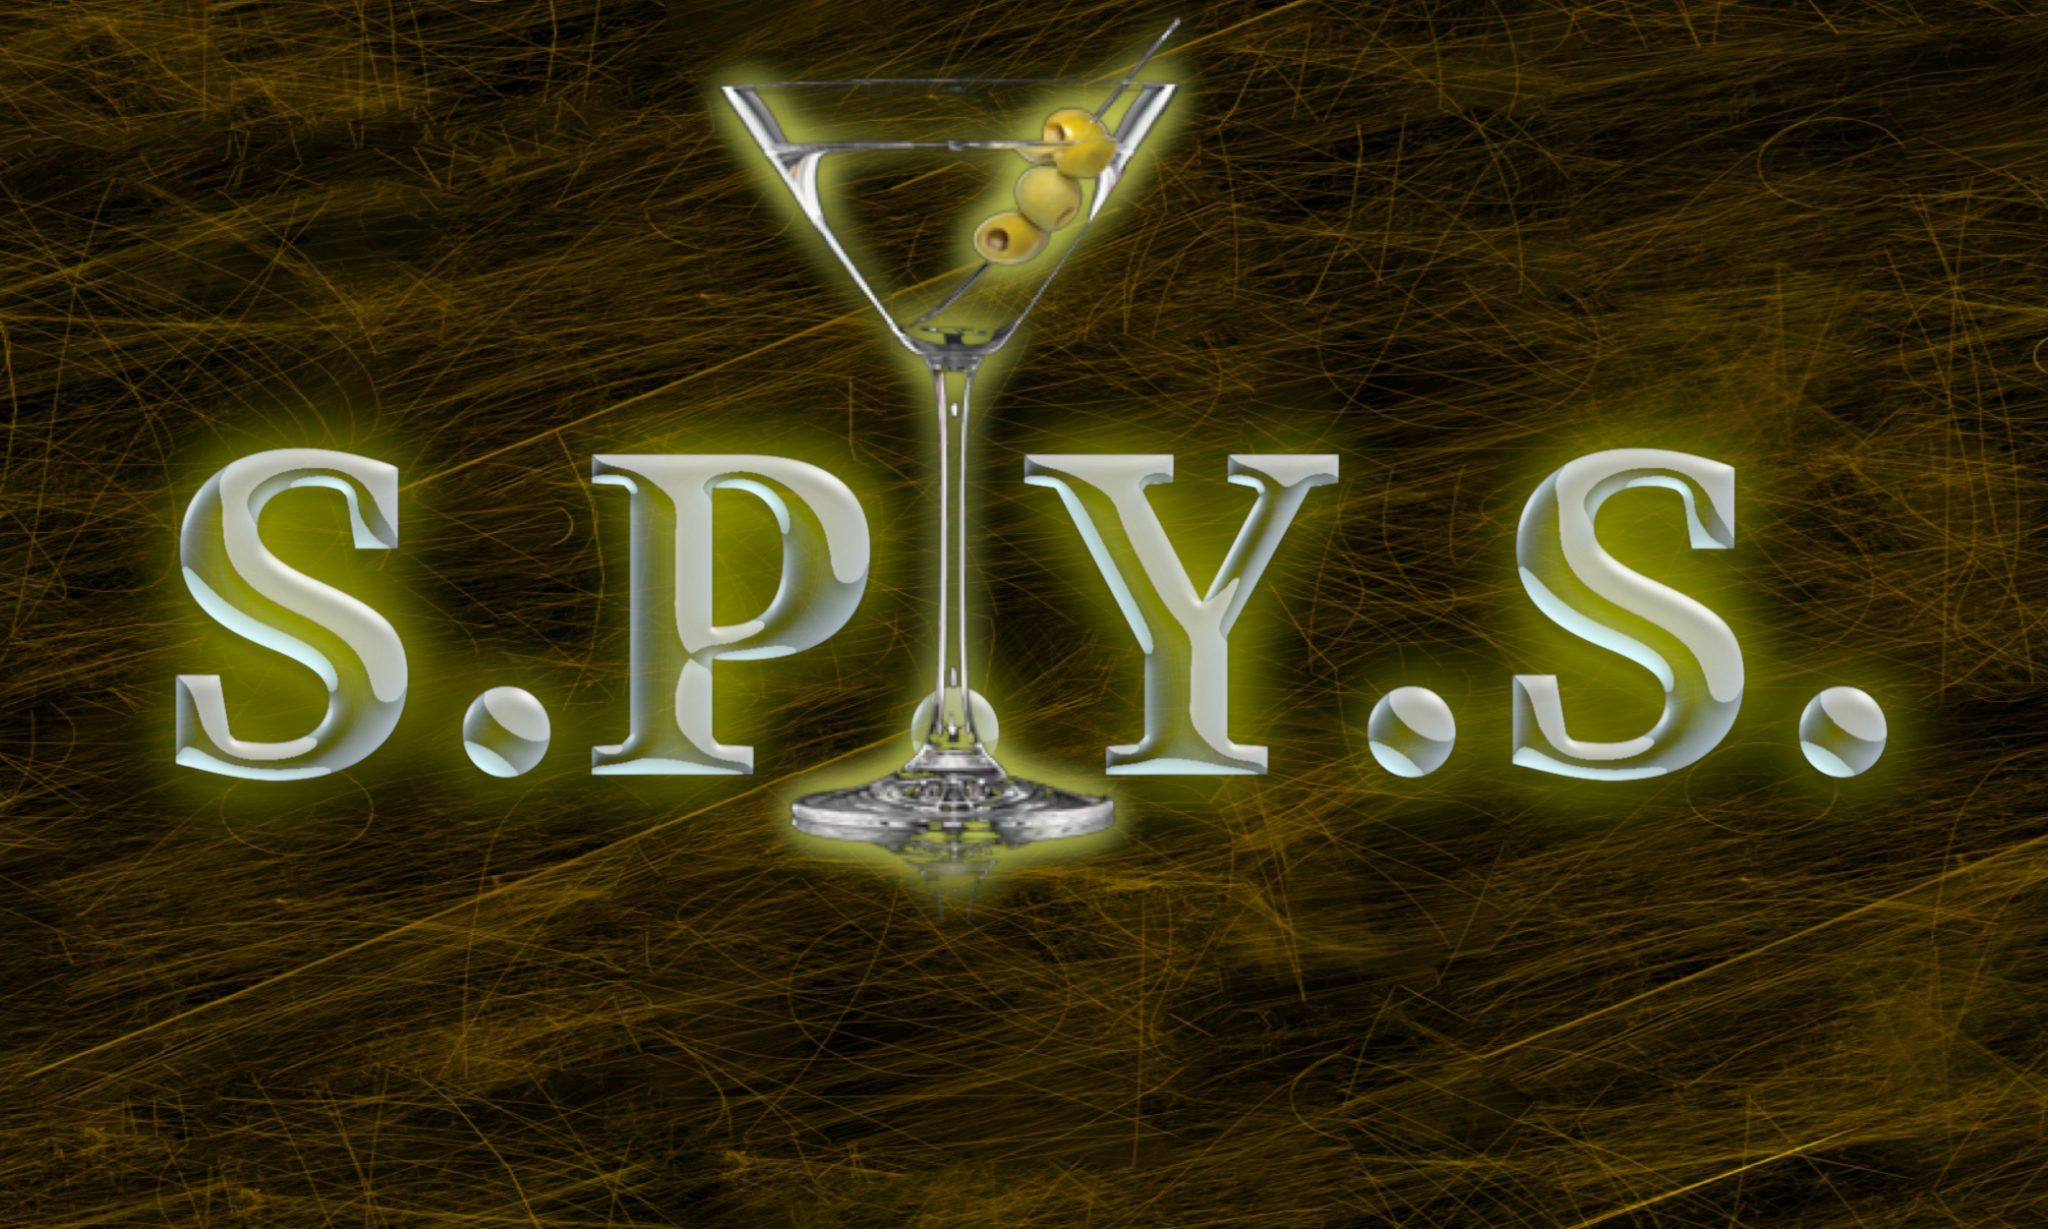 The World Of S.P.Y.S.